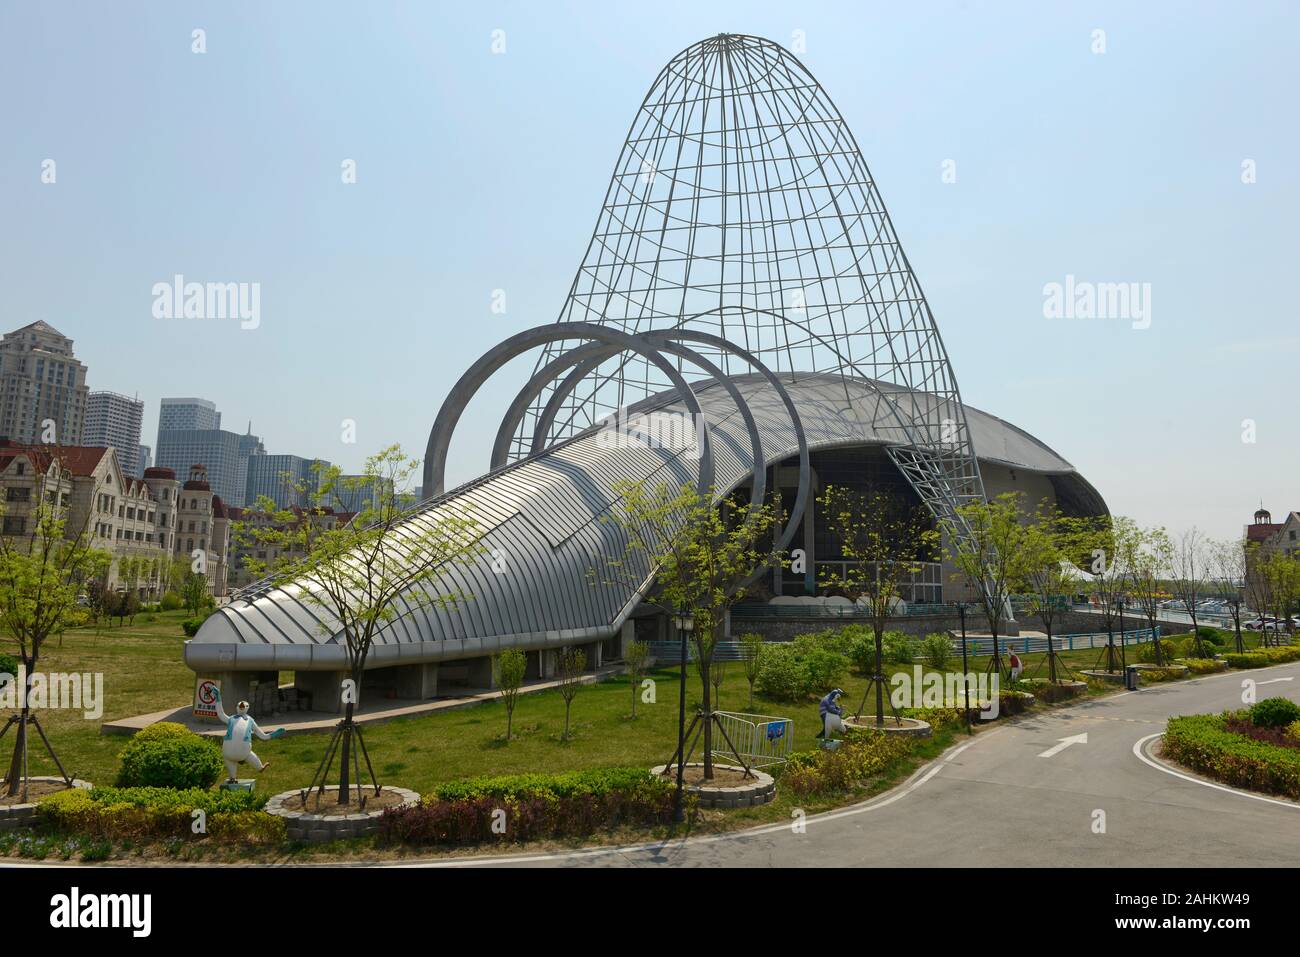 The unusually shaped Haicheng Polar Ocean World tourist attraction in Binhai district, Tianjin city, China, resembles a crustacean Stock Photo